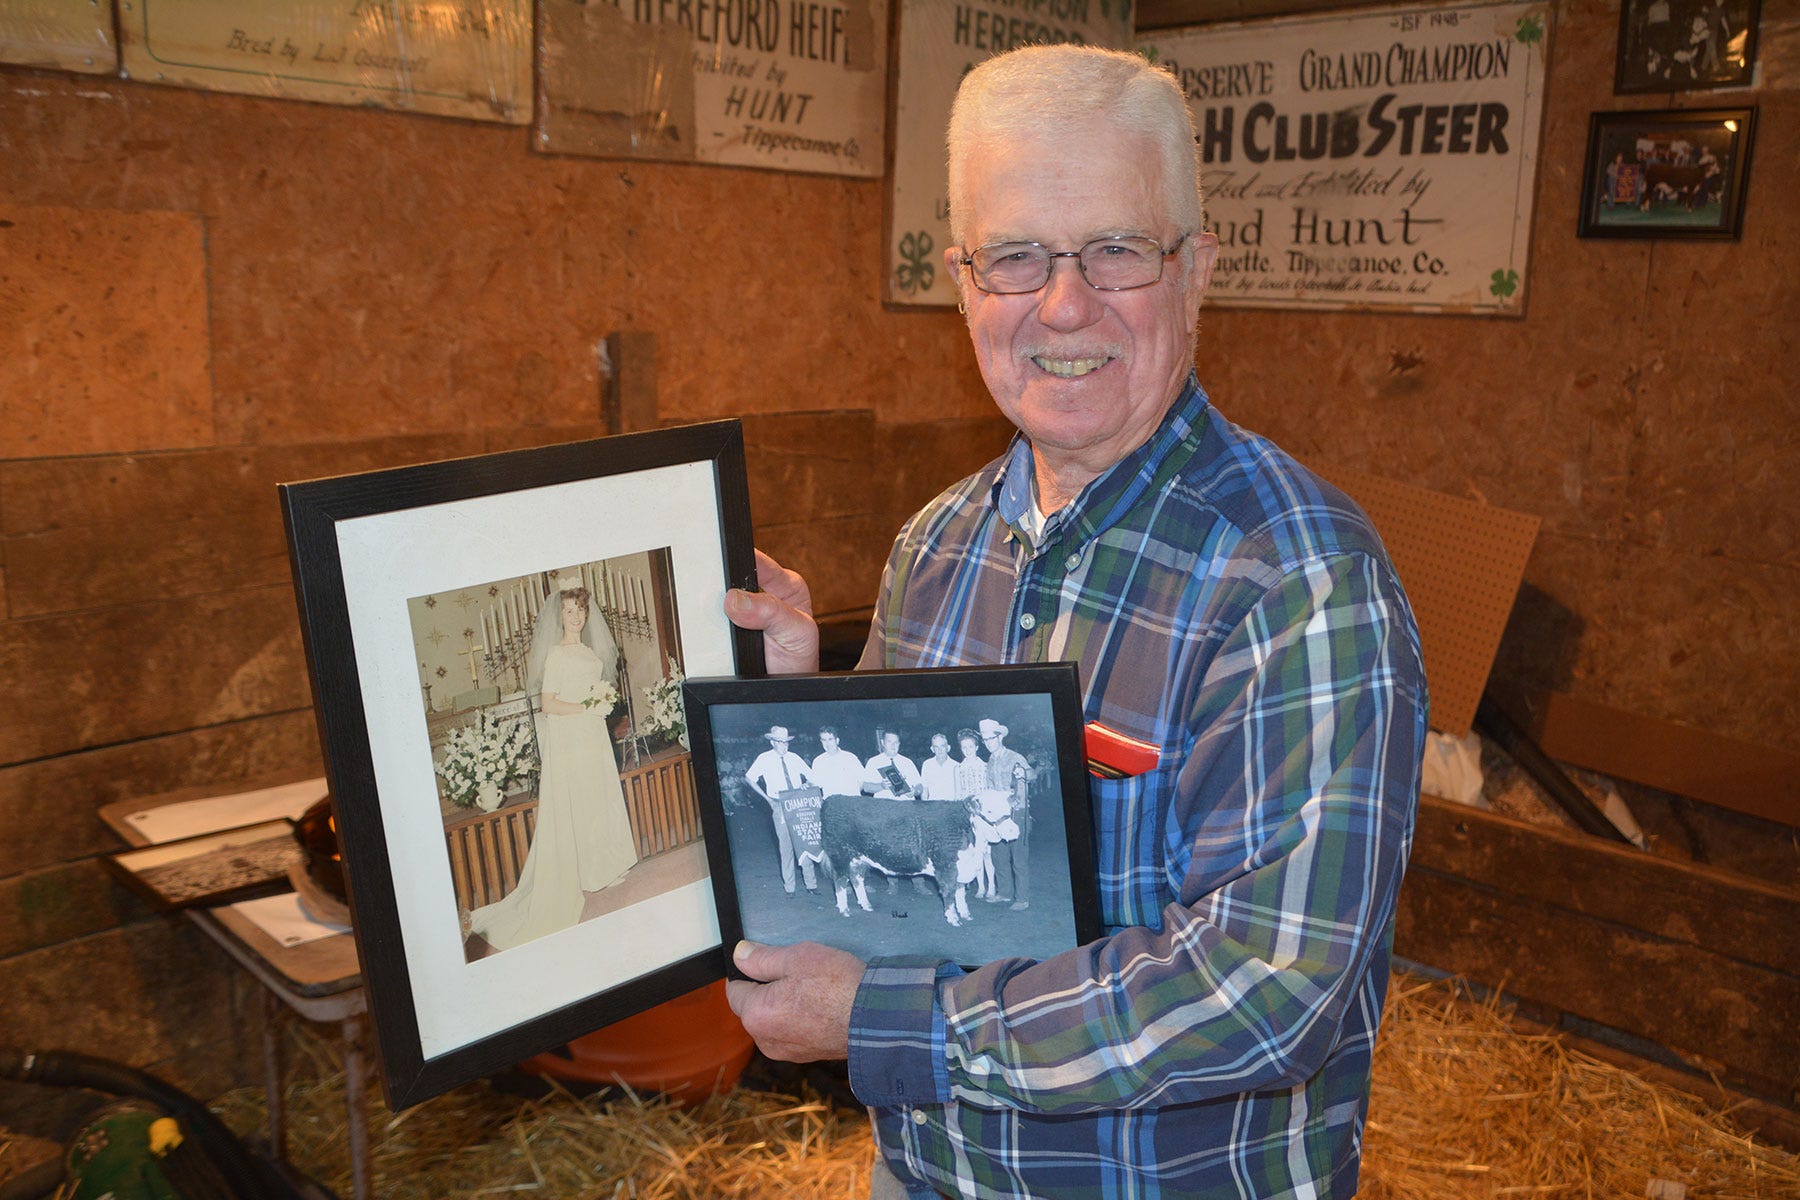 Ted Hunt holding two framed photos -- one of his bride and one of a group of people with a steer